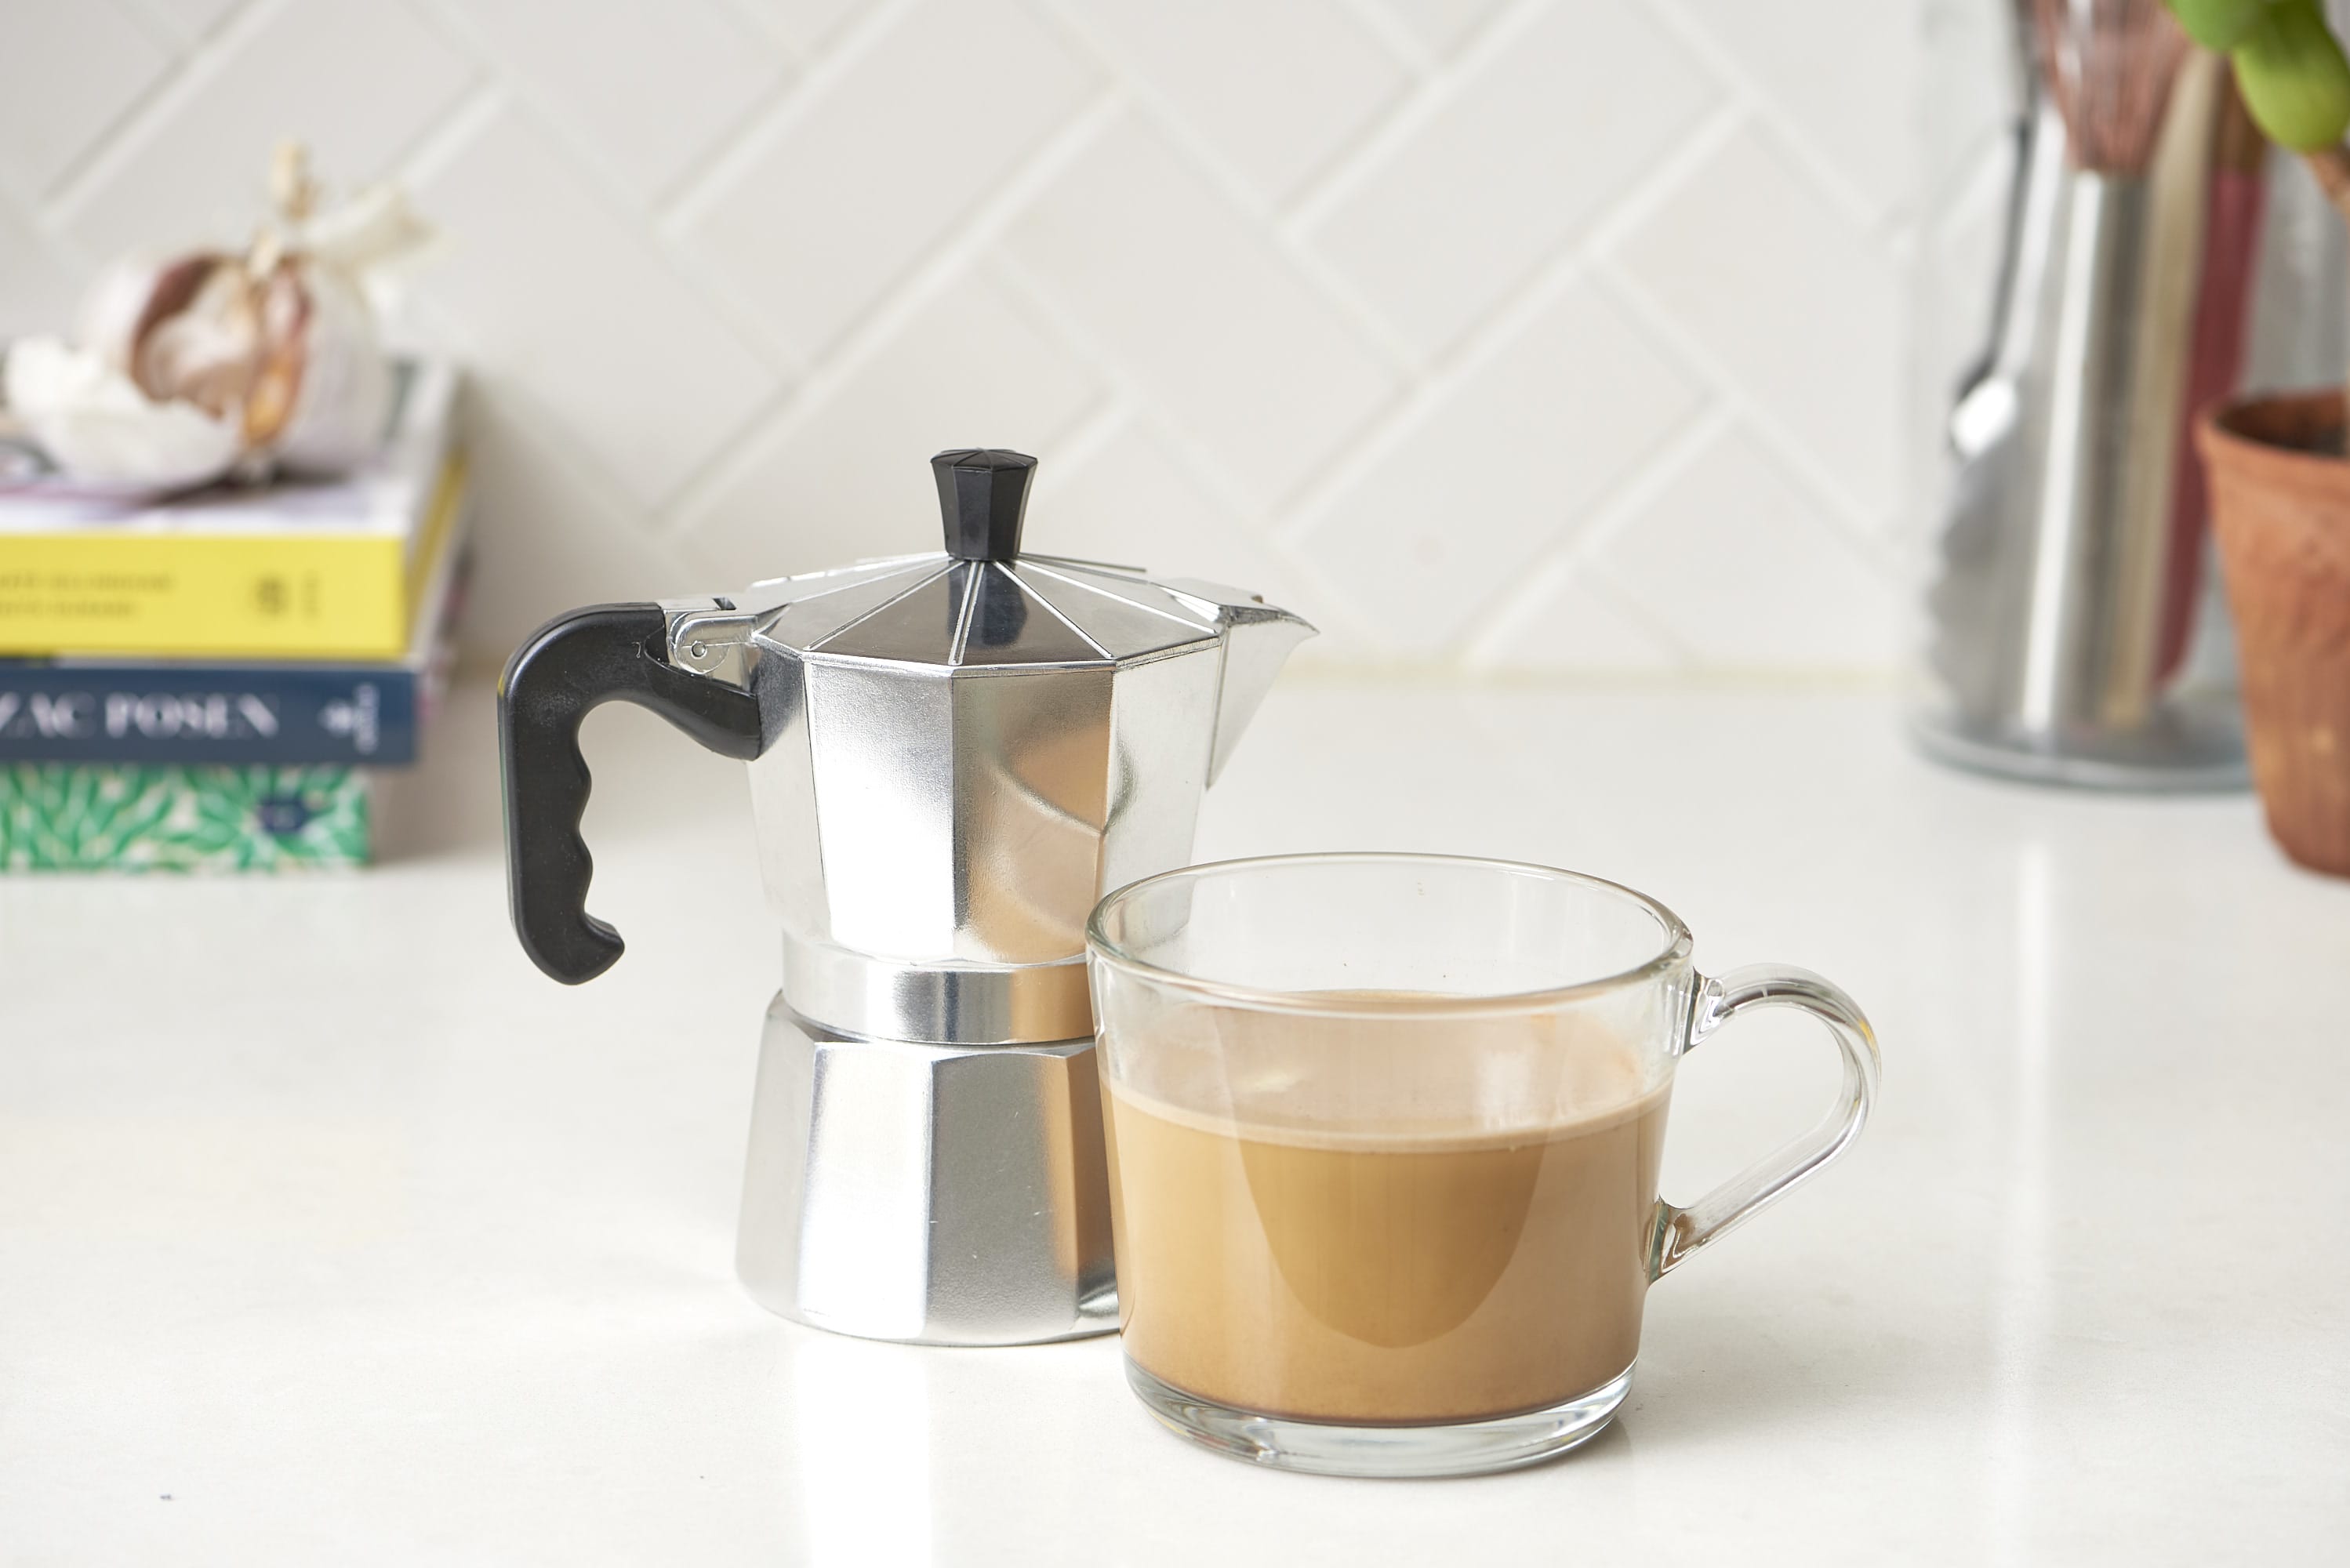 Bodum Pour Over Coffee Maker, reviewed - Baking Bites